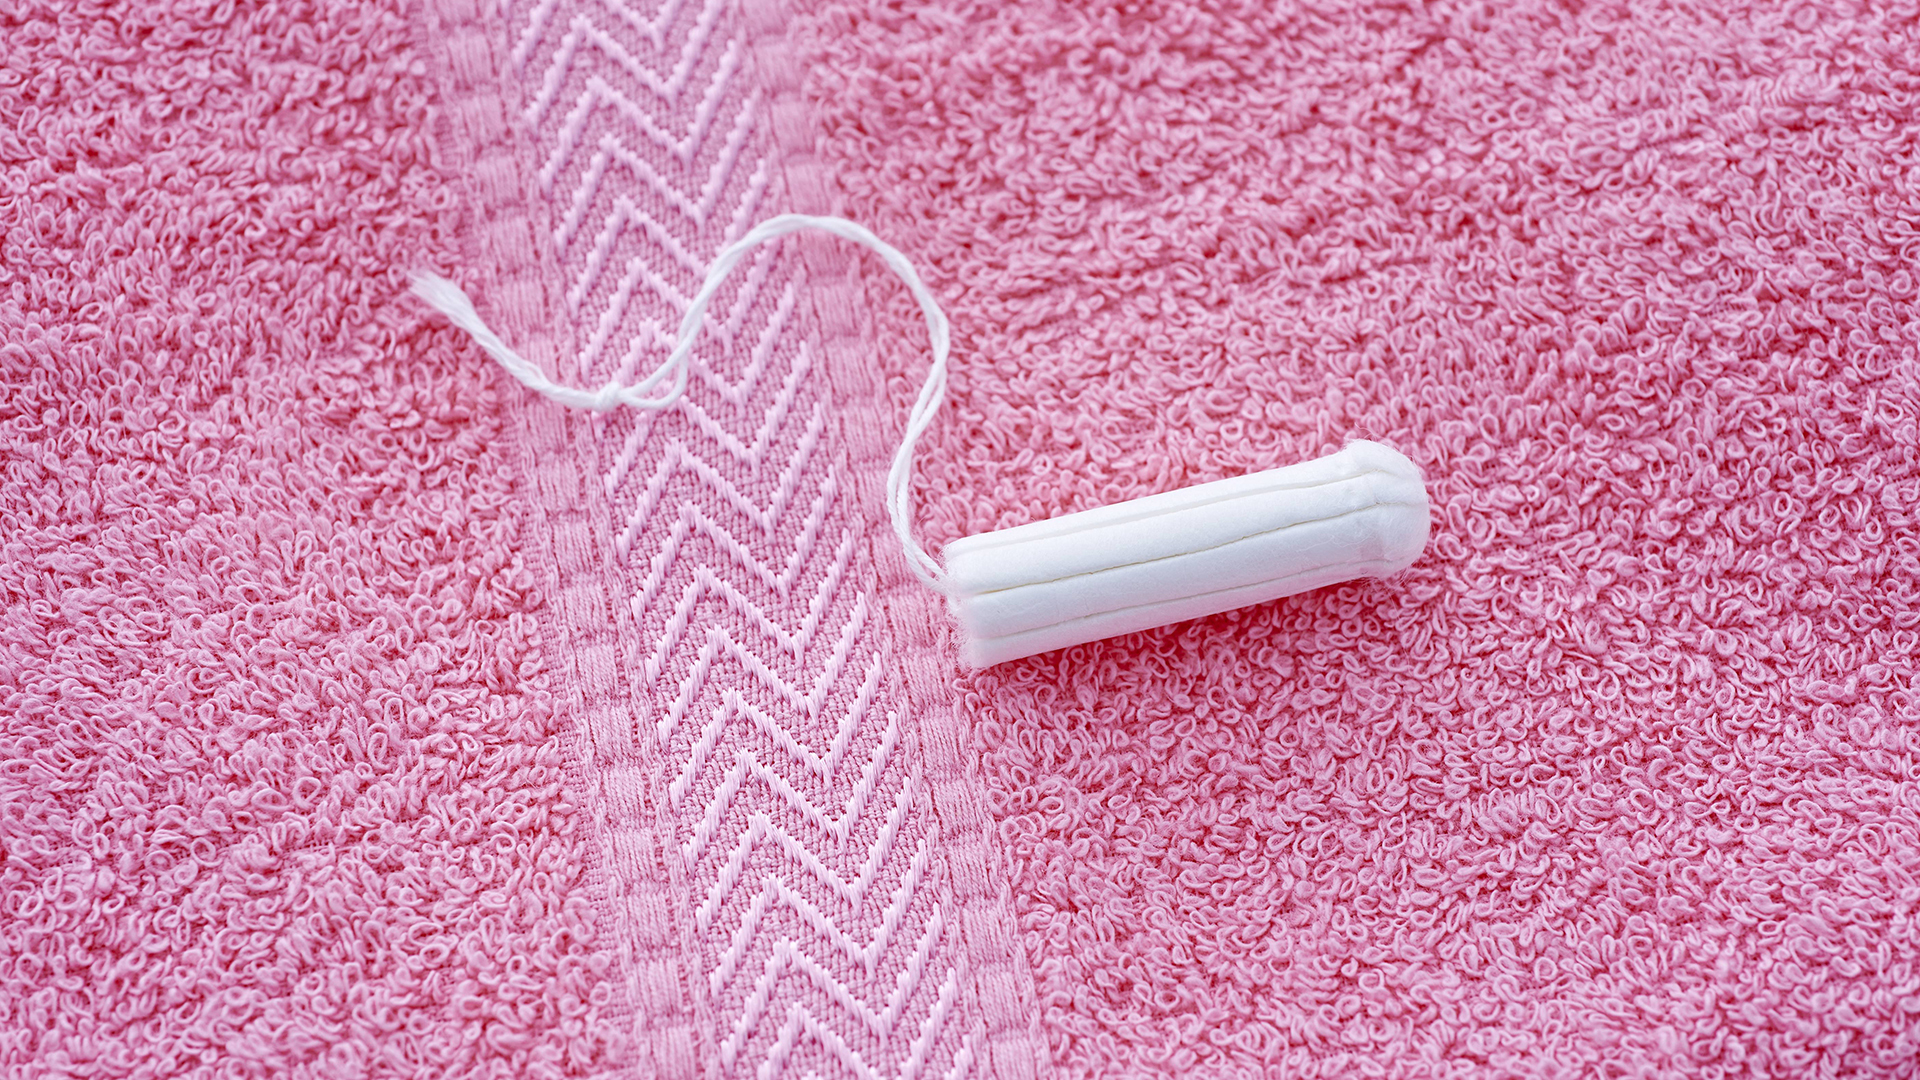 Tampon | picture alliance / BSIP